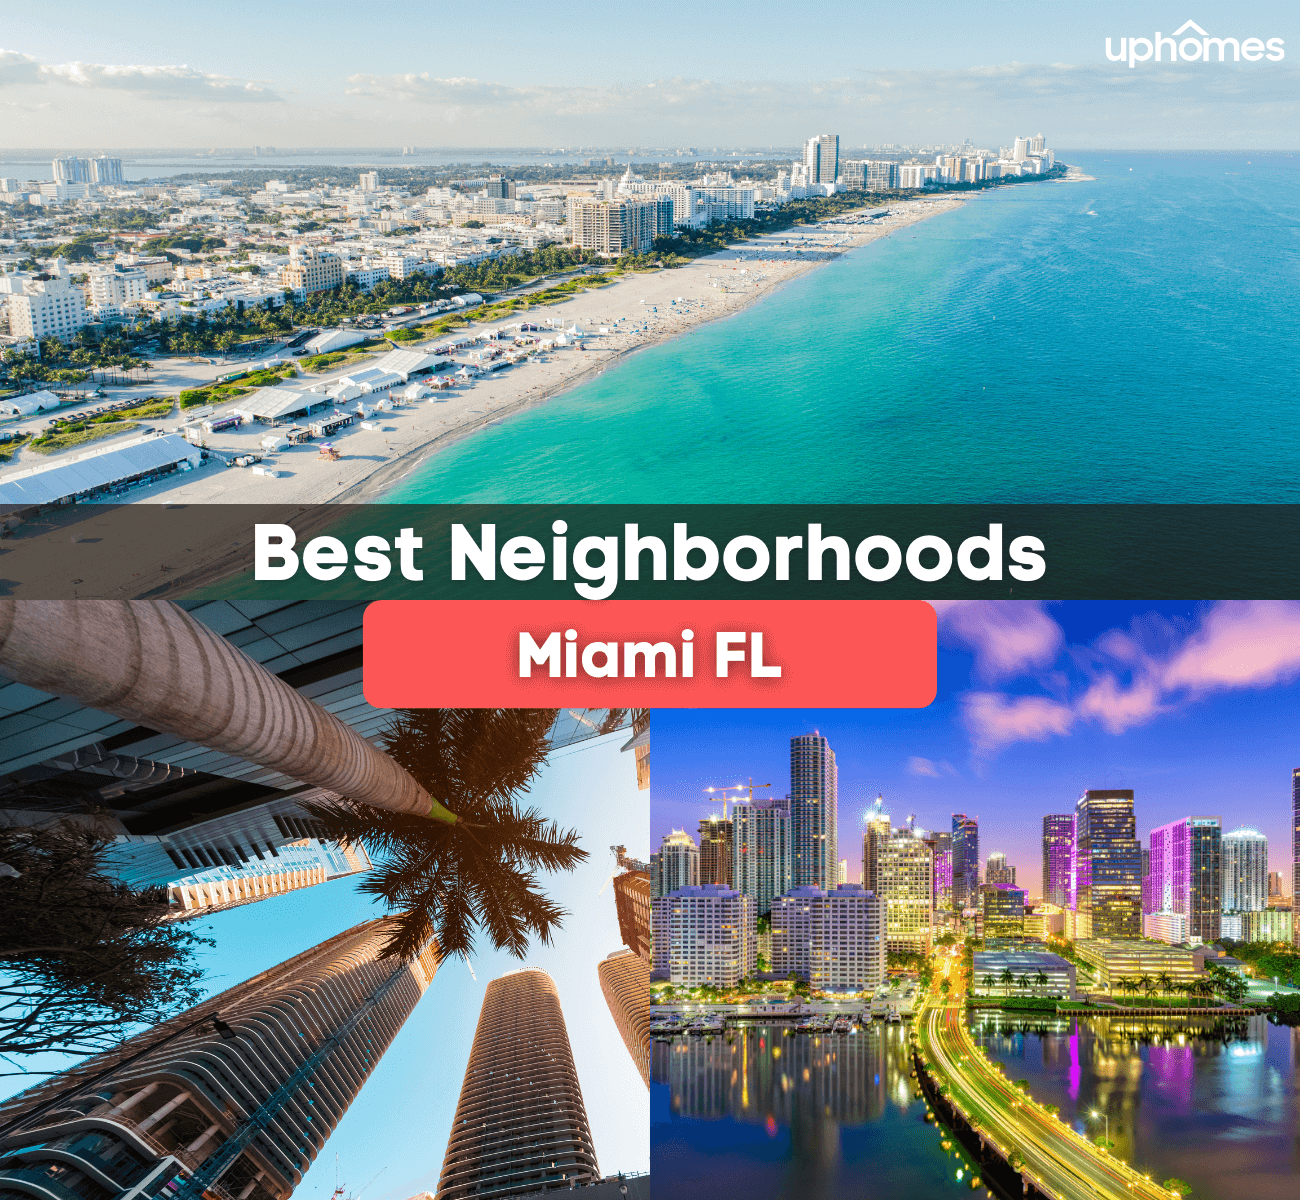 Best Neighborhoods in Miami FL - What are the best places to live in Miami Florida?